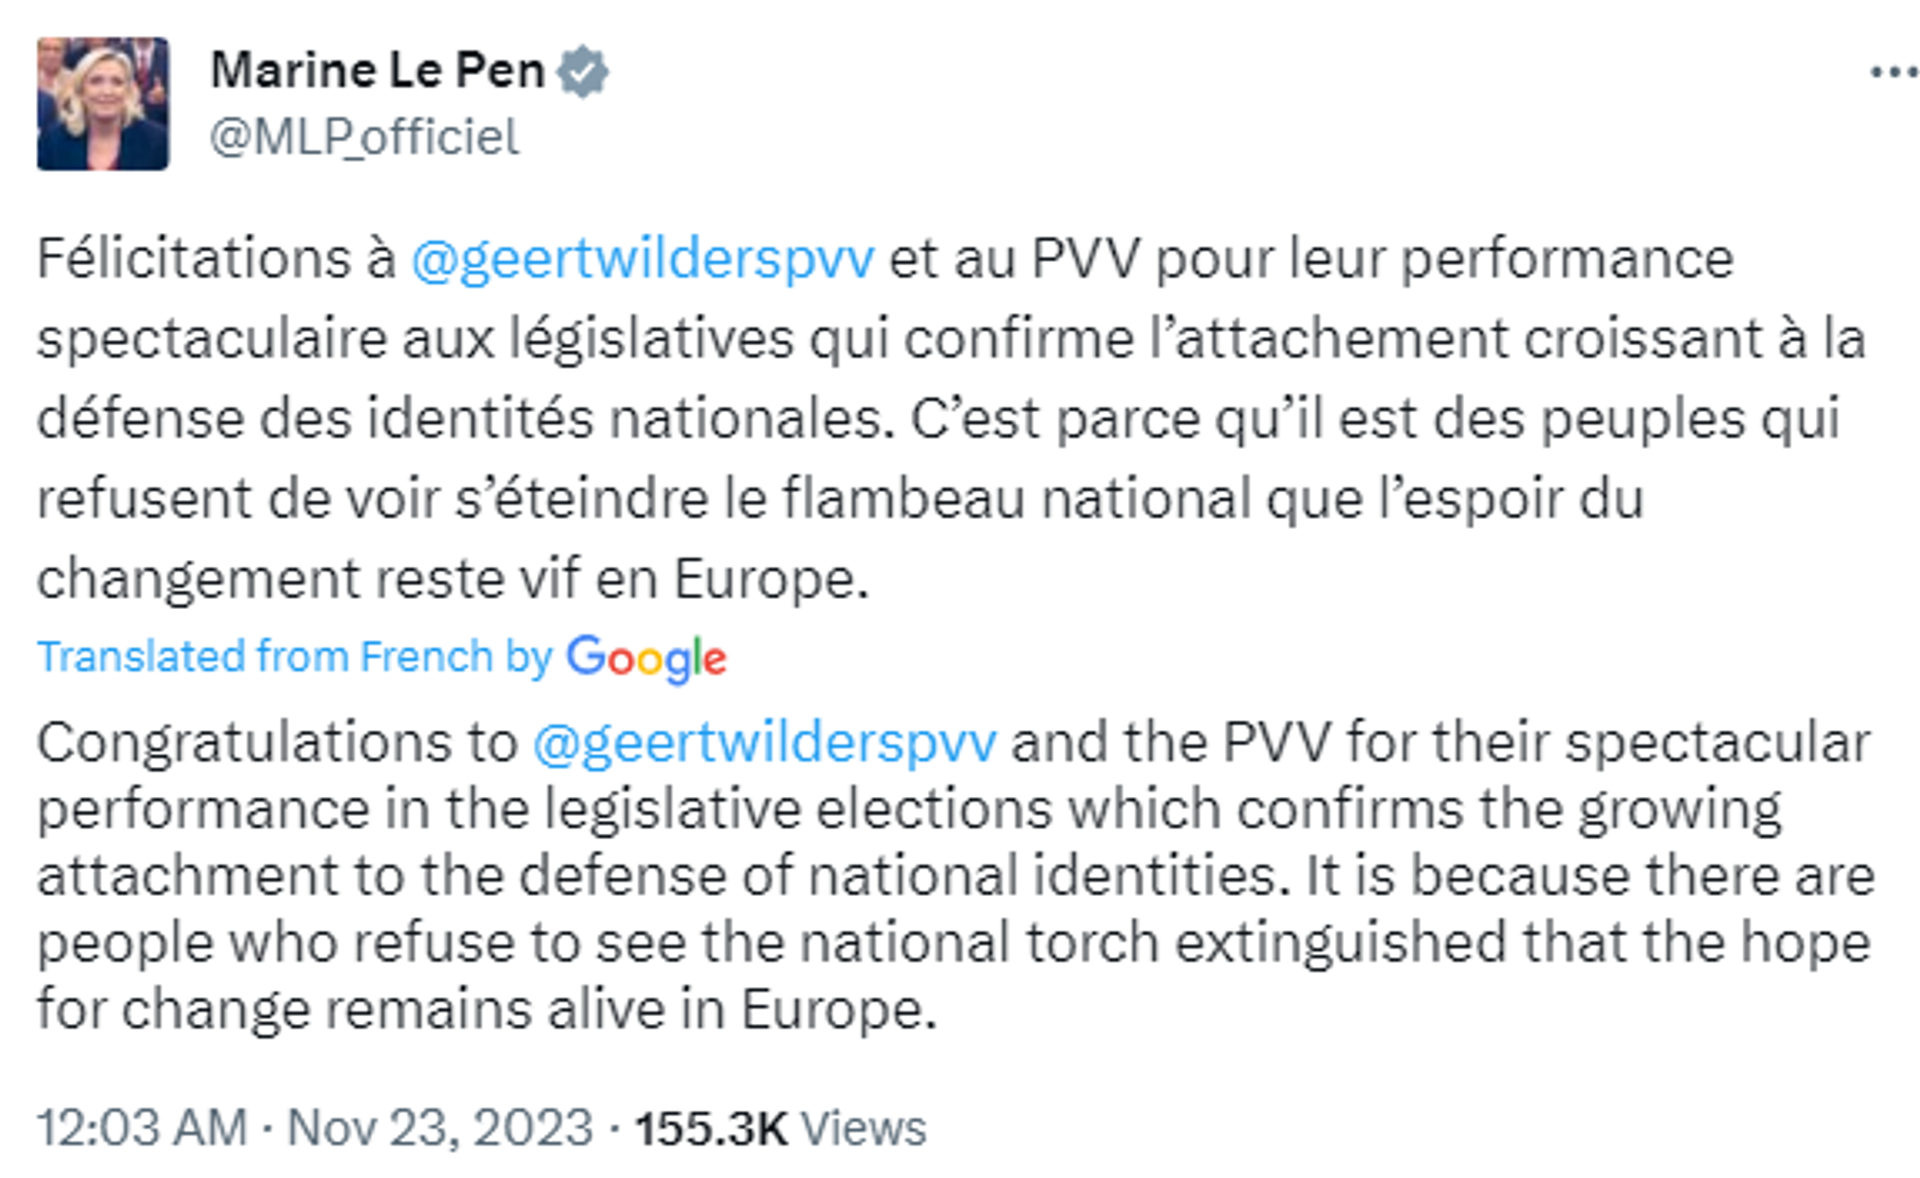 Screenshot of X post by French right-wing leader Marine Le Pen. - Sputnik International, 1920, 23.11.2023